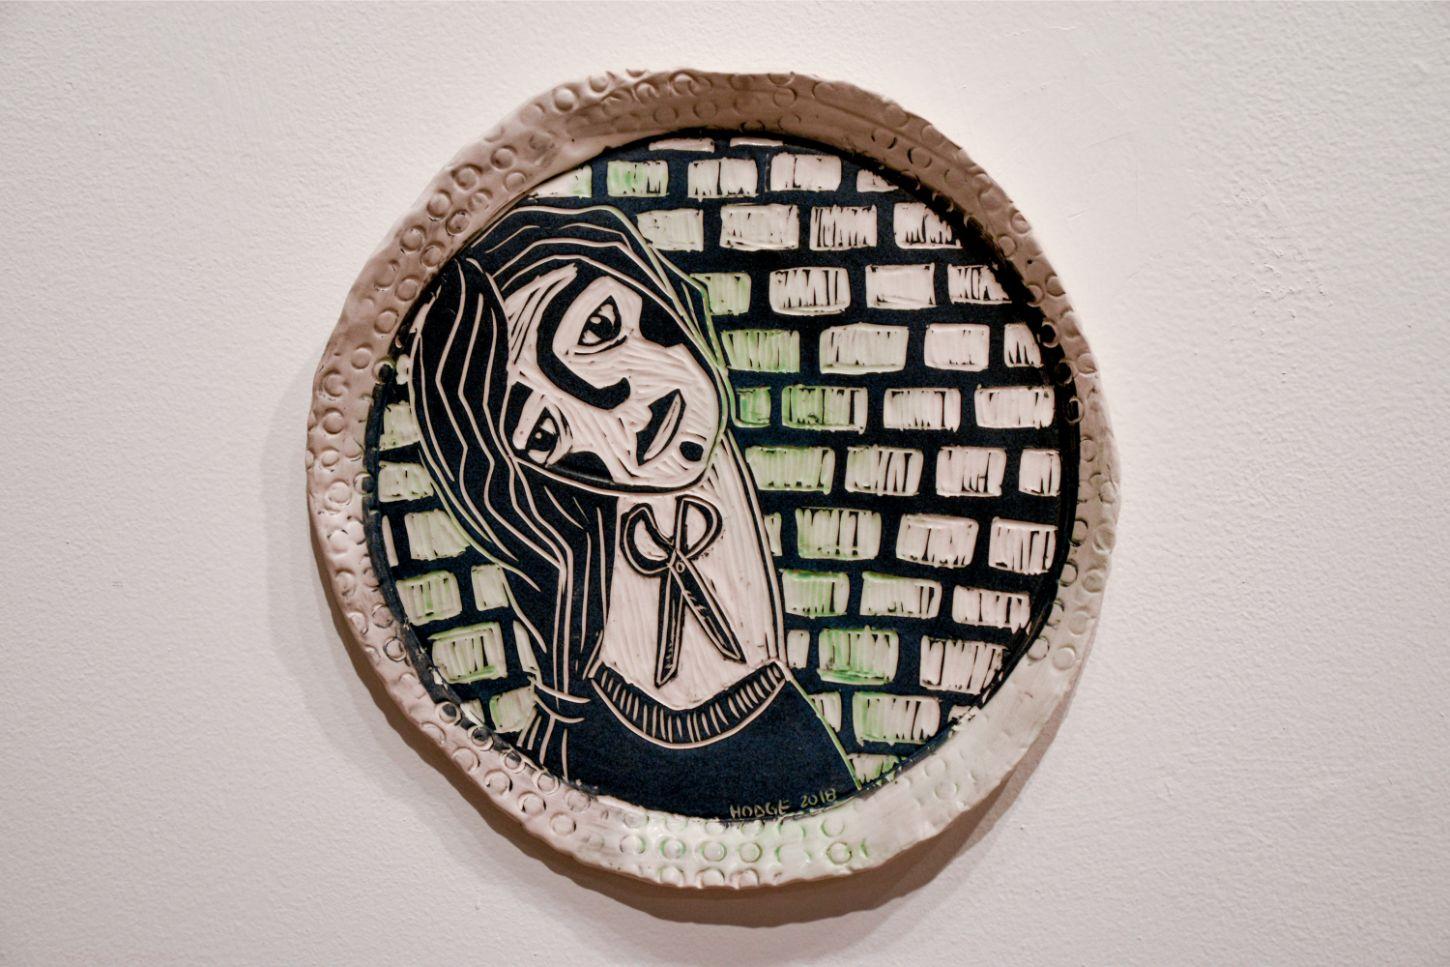 Chin Up, Portrait, 2019 by Alex Hodge
Hand carved porcelain plate 
Height: 11 in x Diameter: 11 in
Unique

Her poetic porcelain plates examine and reimagine the history of art in a way that values women, not only in body, but in wholeness, power,